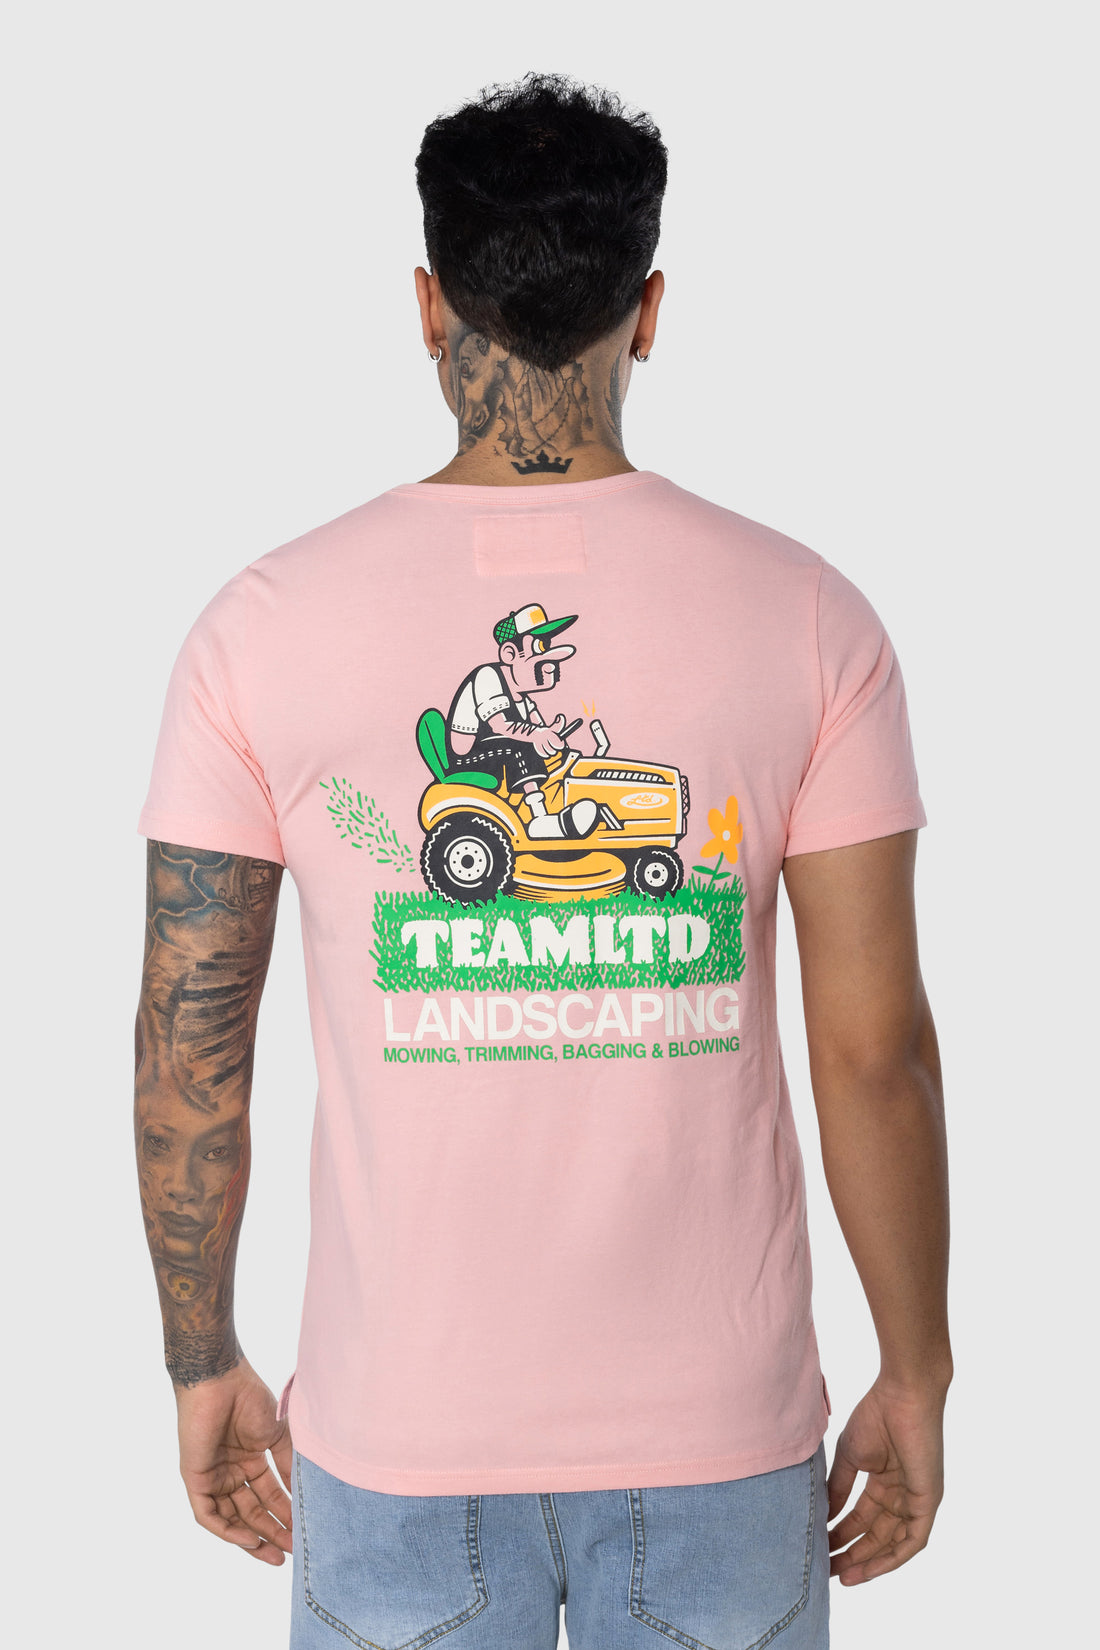 Landscaping Tee